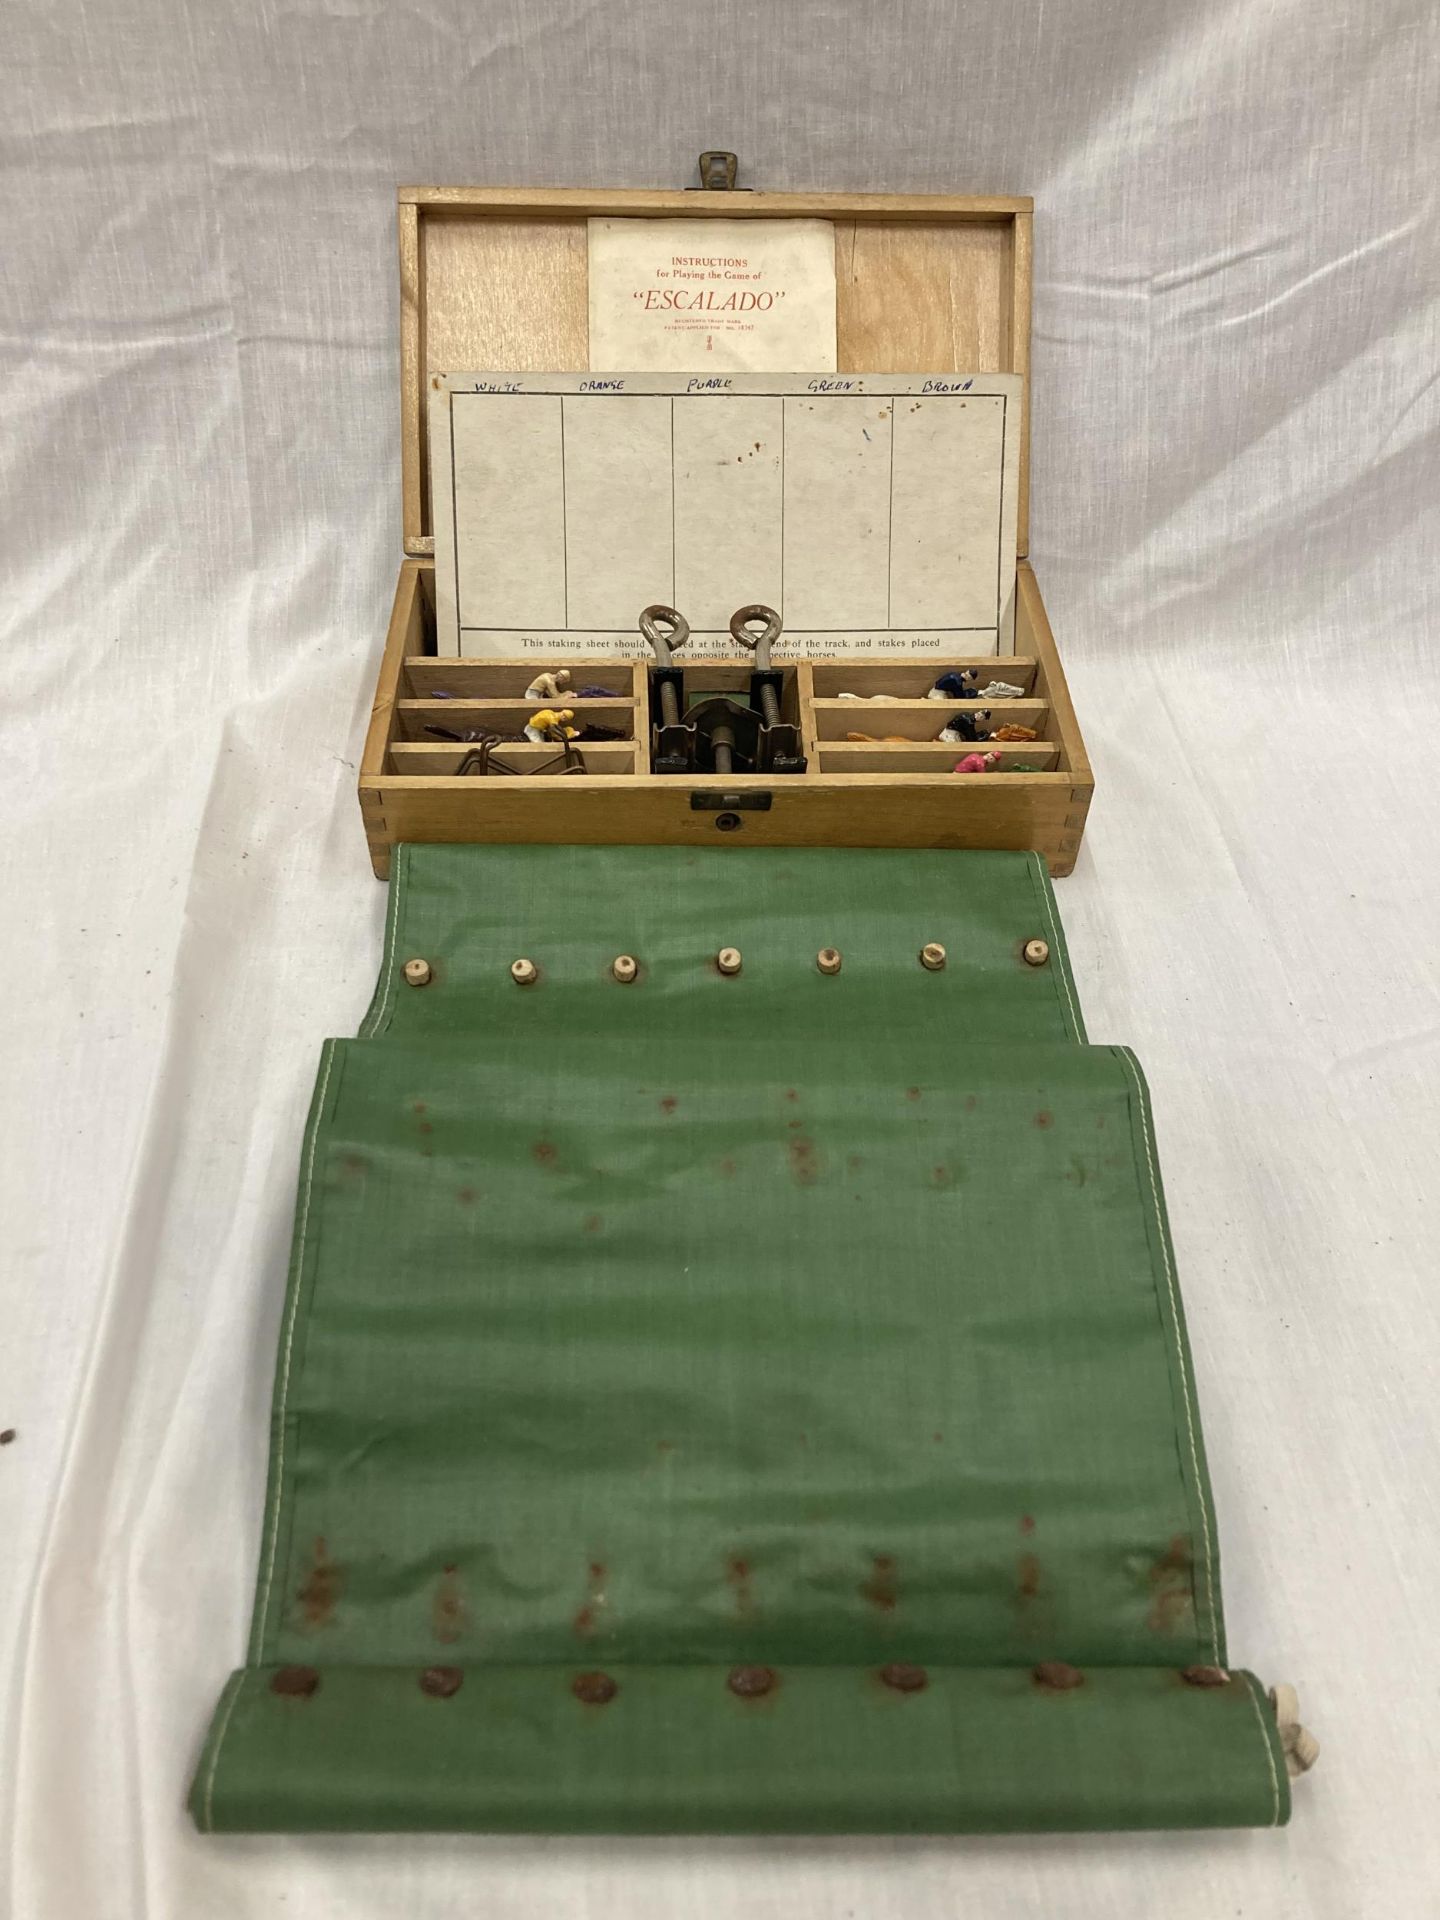 A VINTAGE BOXED ESCALADO GAME WITH INSTRUCTIONS AND A STAKING SHEET - Image 5 of 8